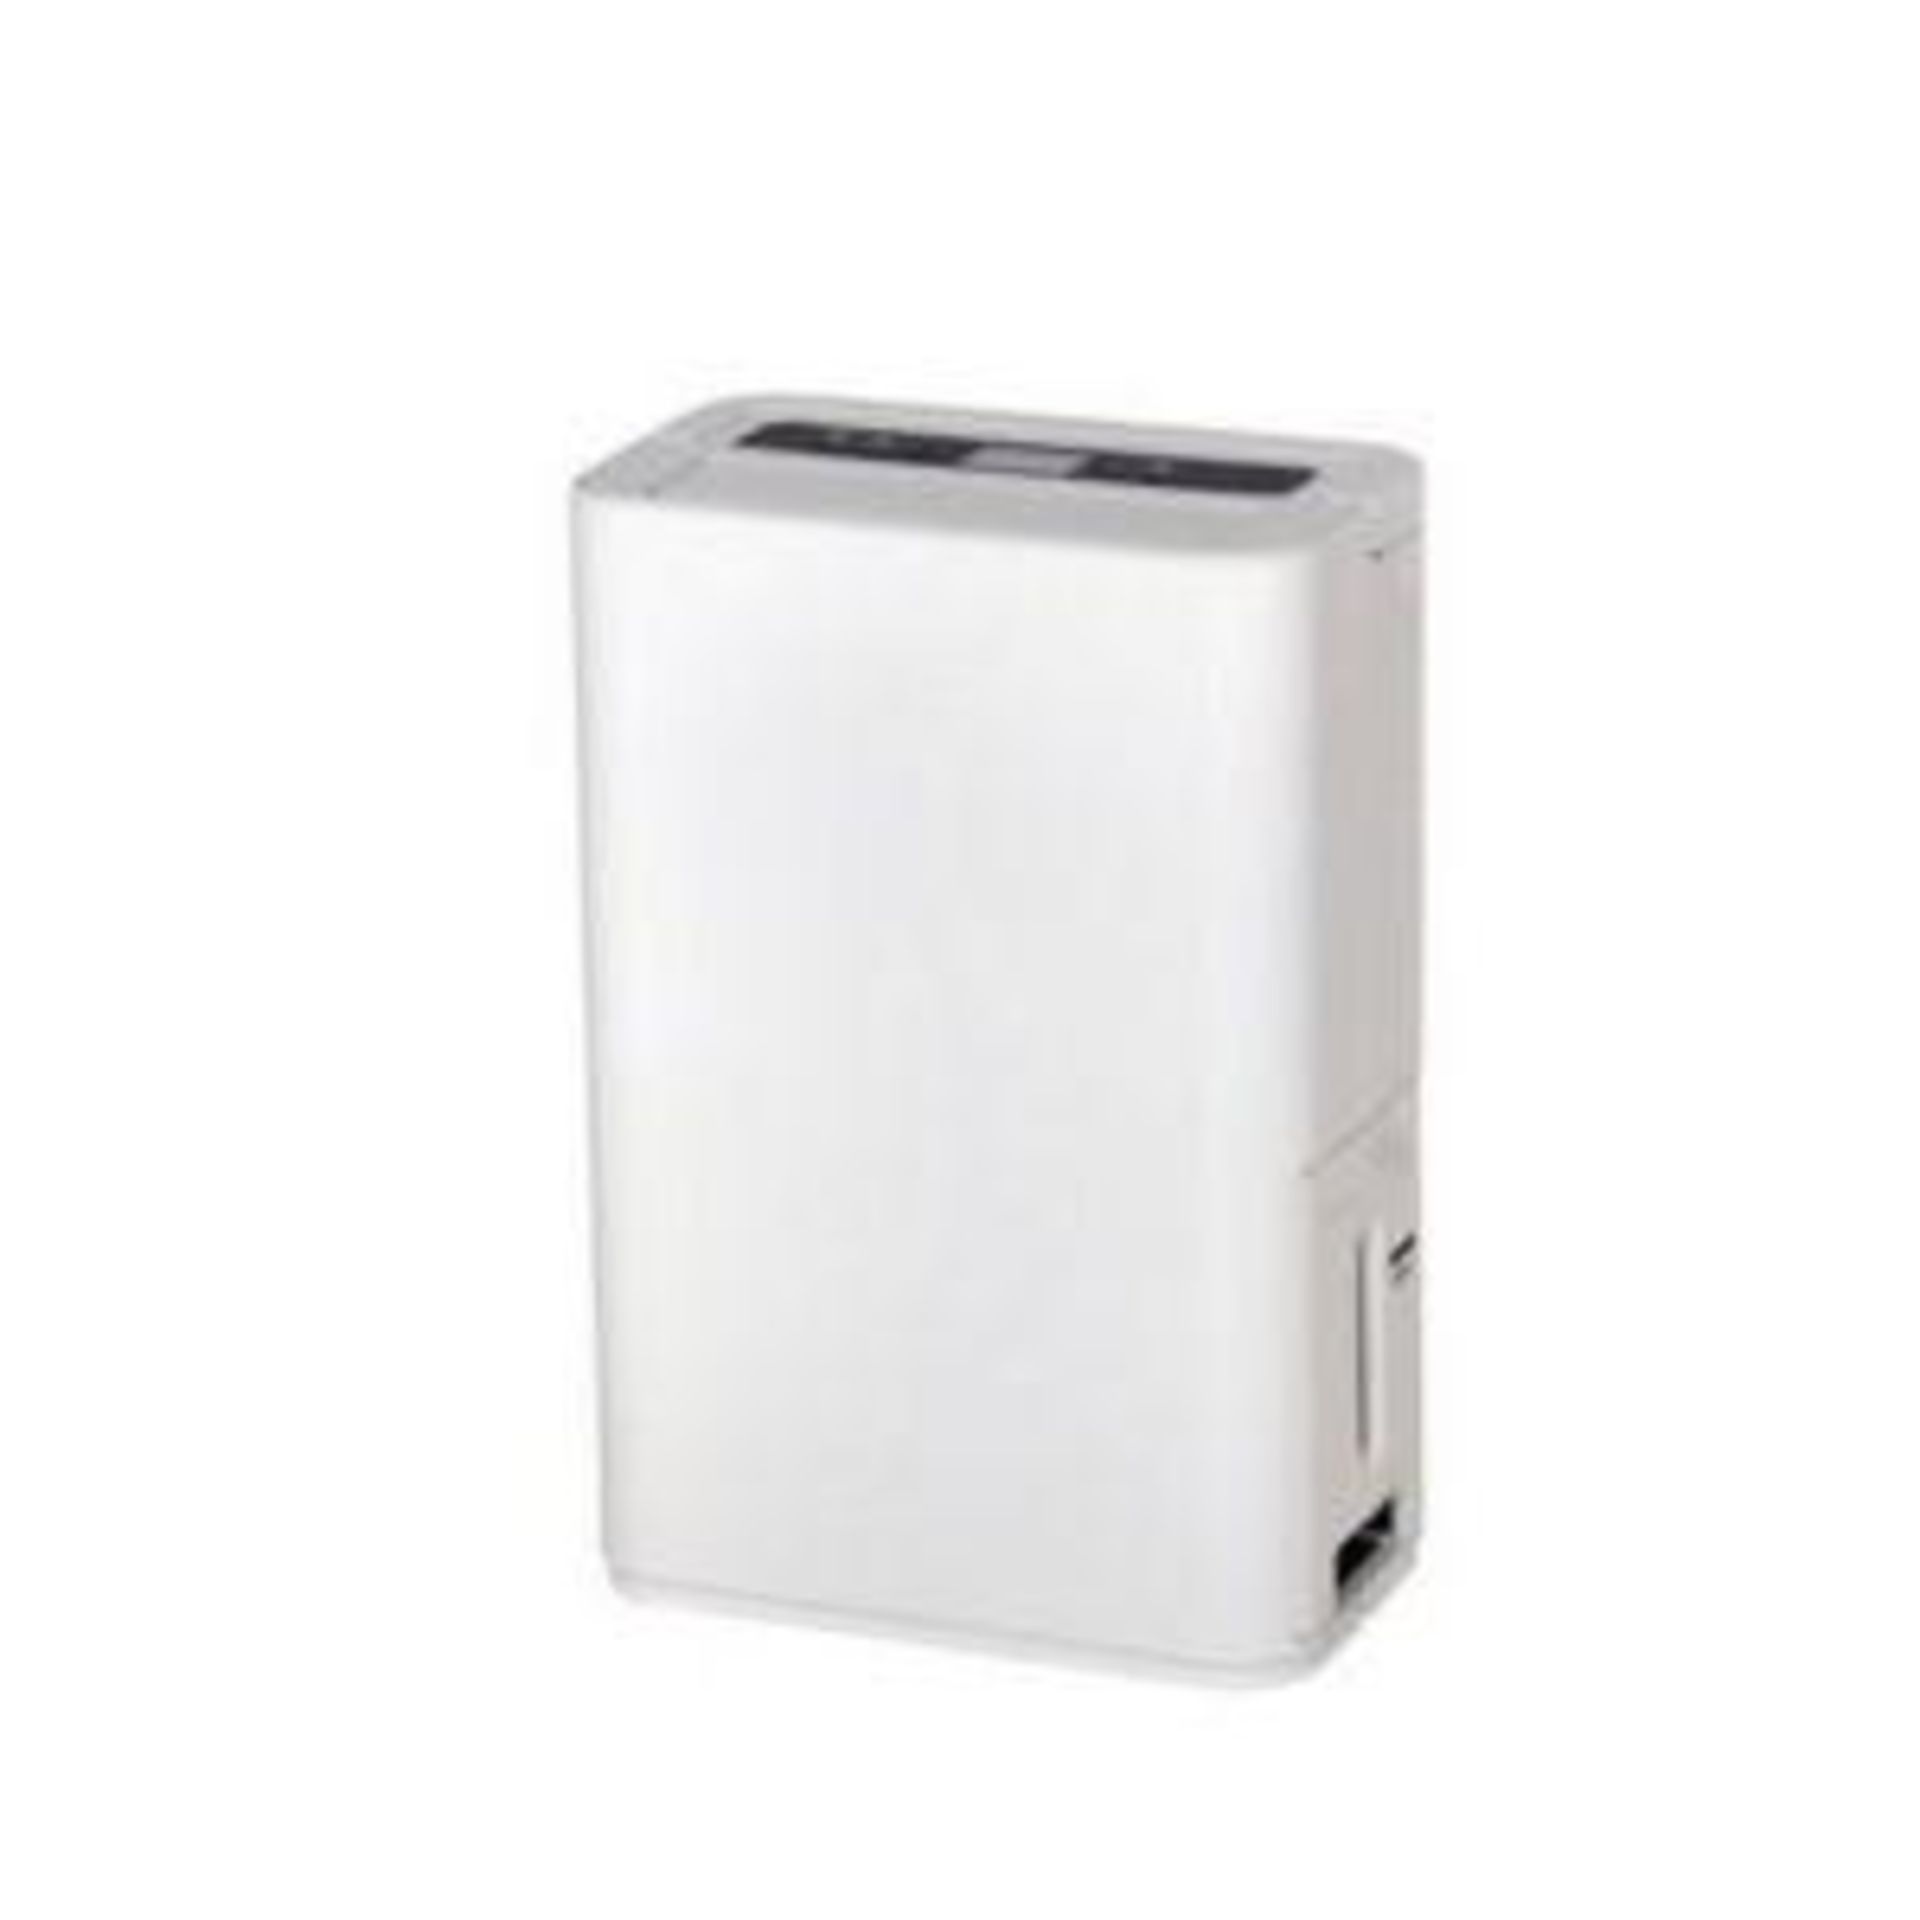 Blyss Corded Electric Dehumidifier 2 Speed WDH-316DB 16Ltr 280W 240V - SR47. Ideal for removing